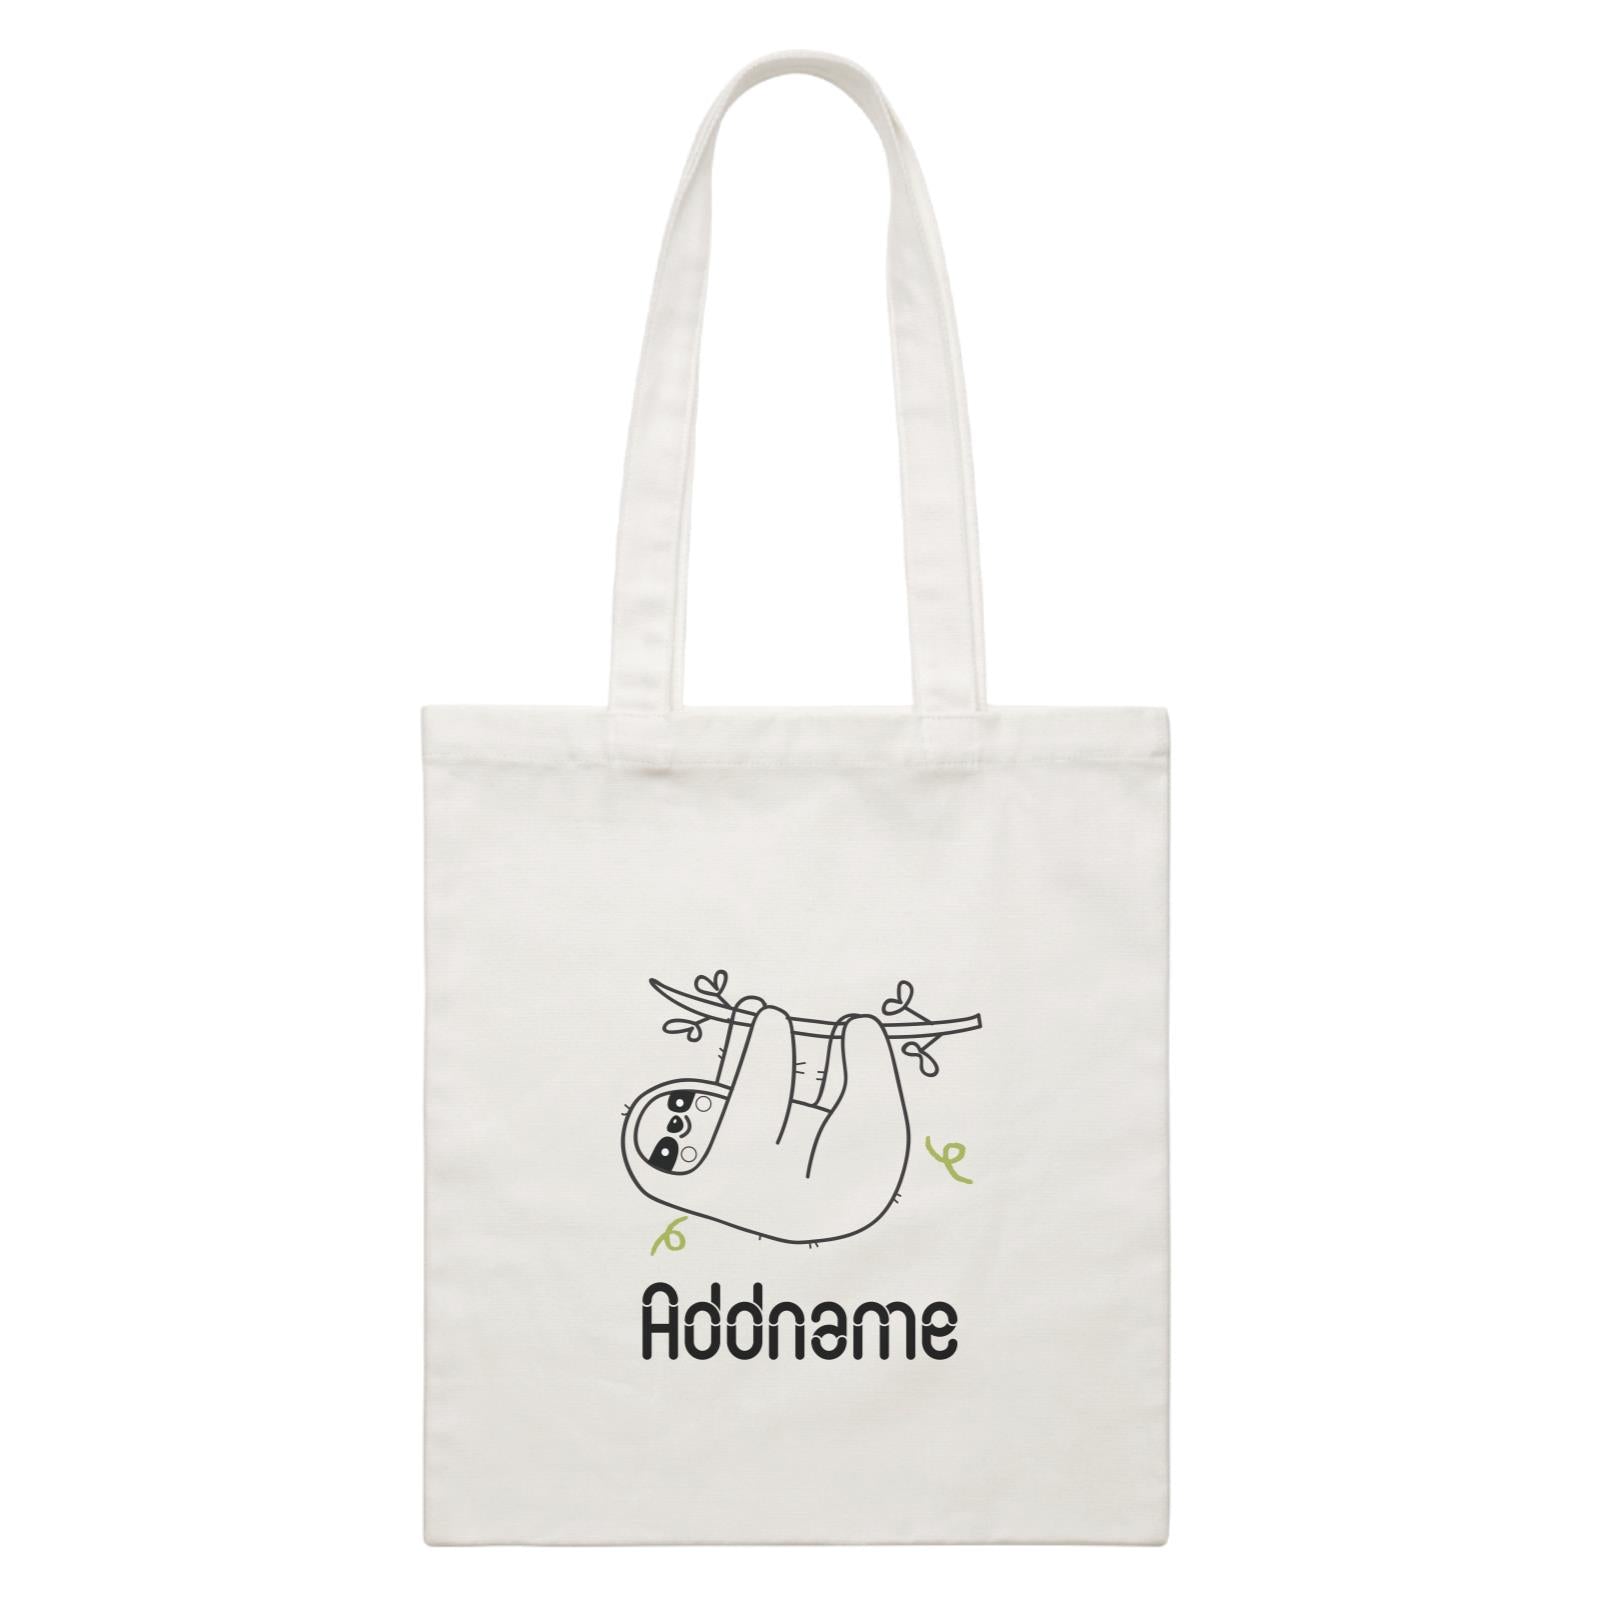 Coloring Outline Cute Hand Drawn Animals Furry Hanging Sloth Addname White White Canvas Bag